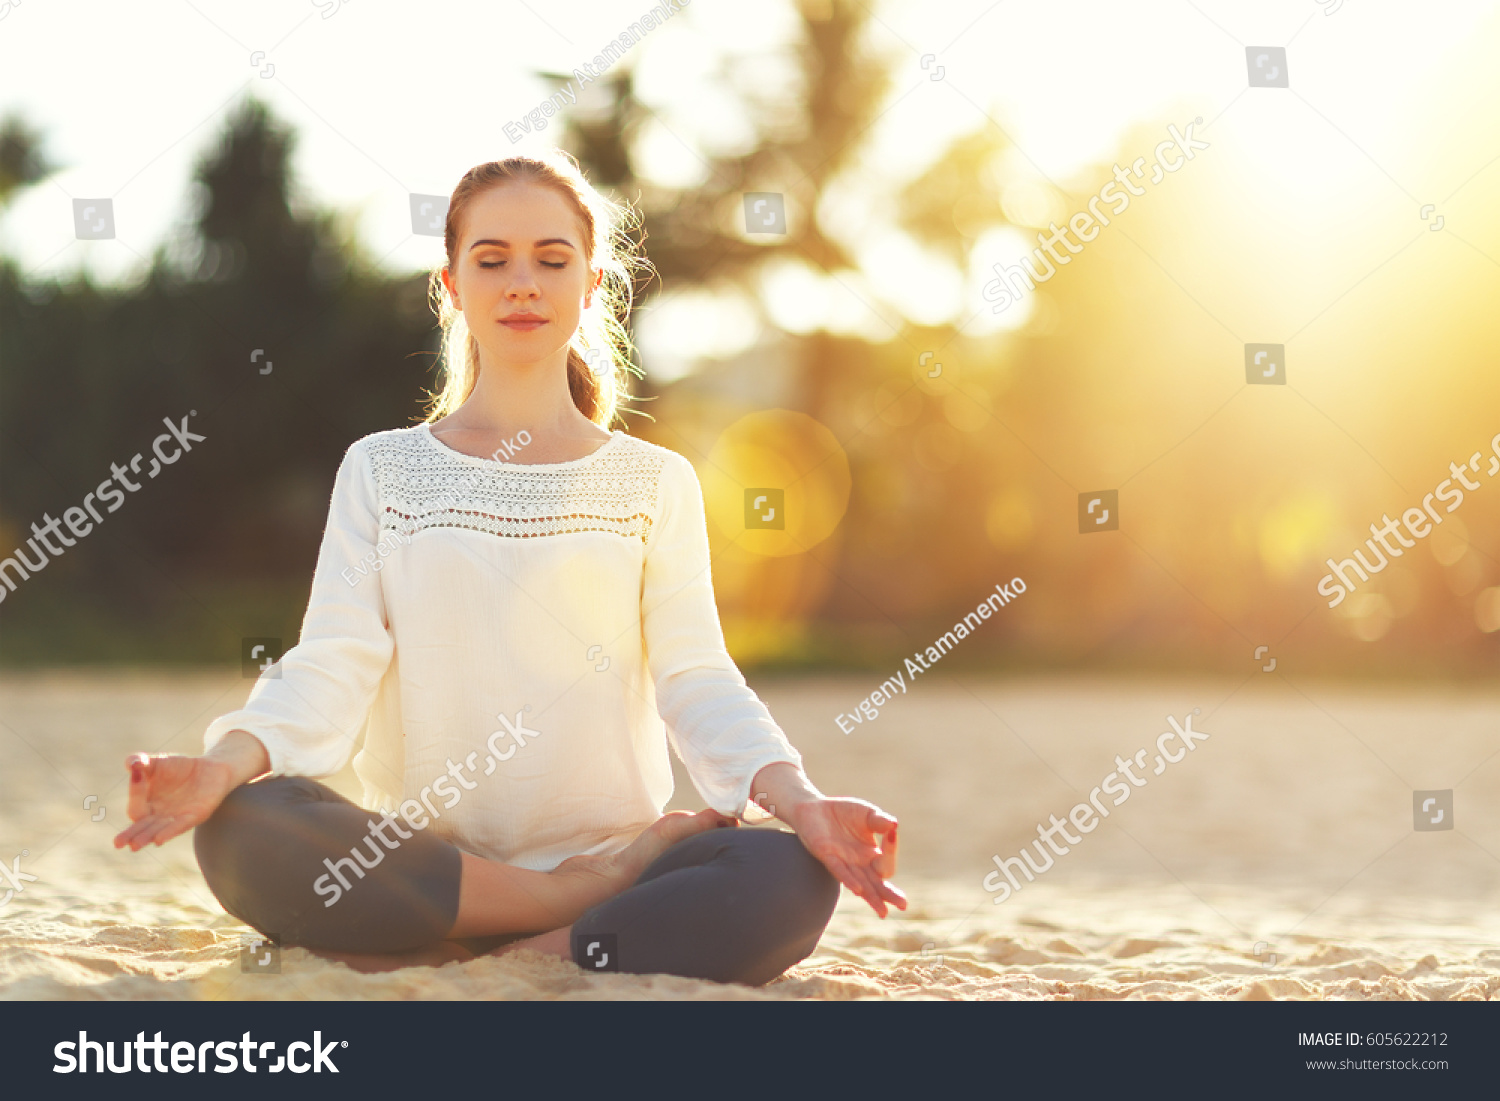 woman practices yoga and meditates in the lotus position on the beach
 #605622212